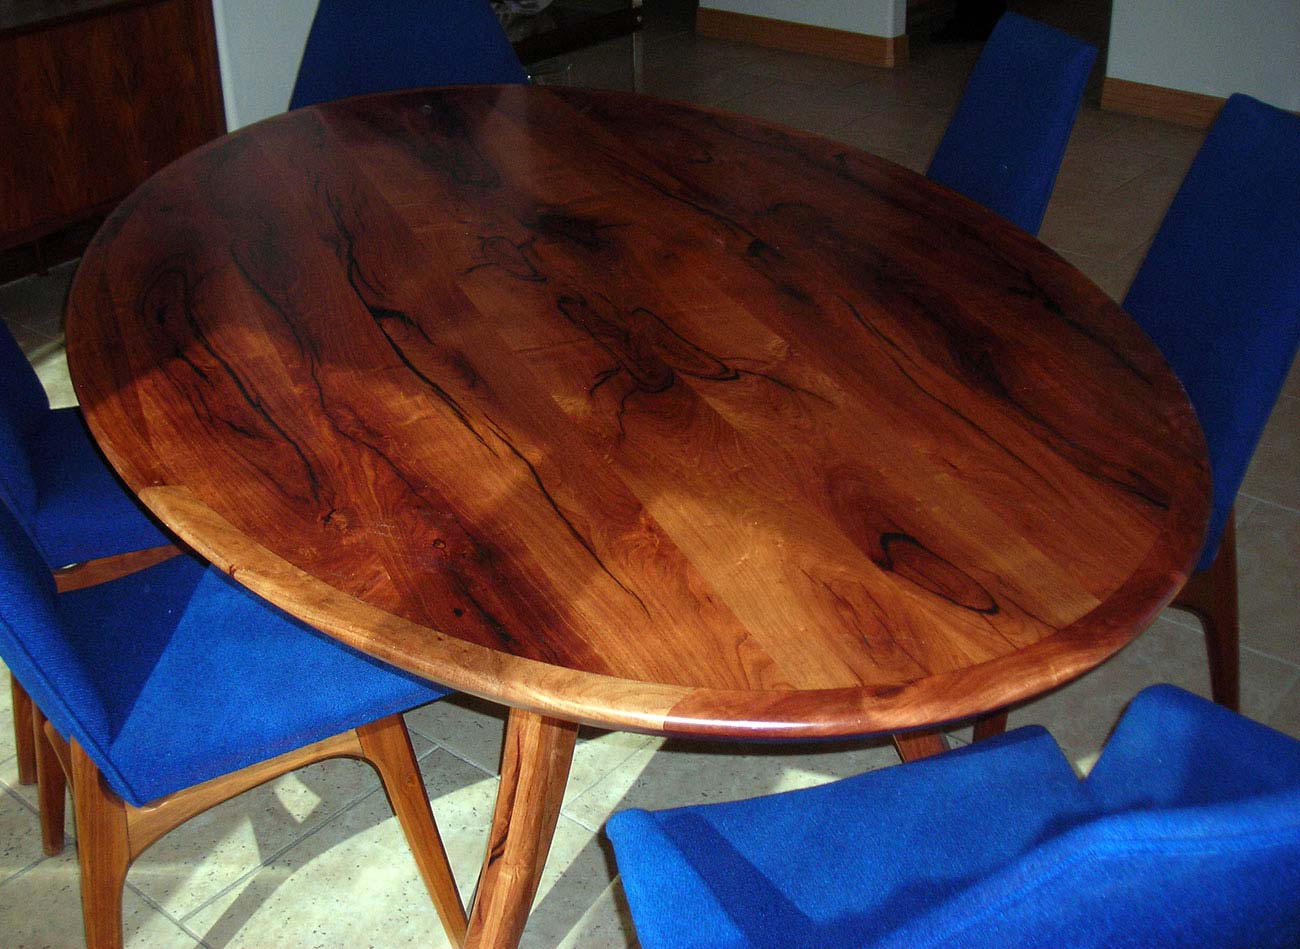 Mesquite dining table